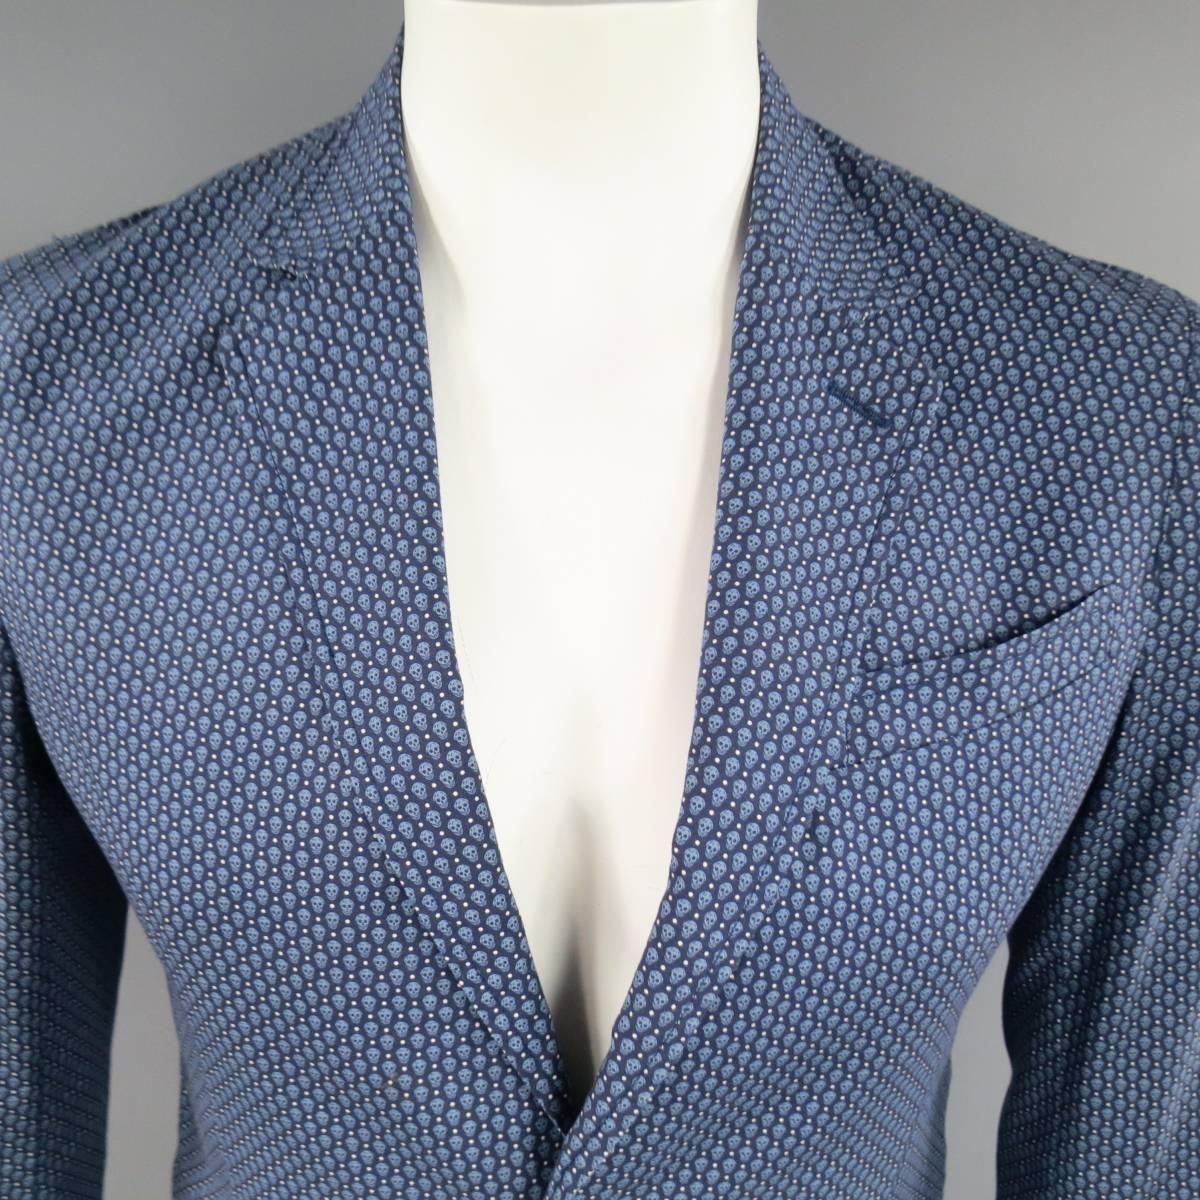 This summer weight ALEXANDER MCQUEEN sport coat comes in navy blue cotton with all over signature skull print and features a notch lapel, two button closure, faux slit pockets and single back vent. Made in Italy.
 
Excellent Pre-Owned Condition.
